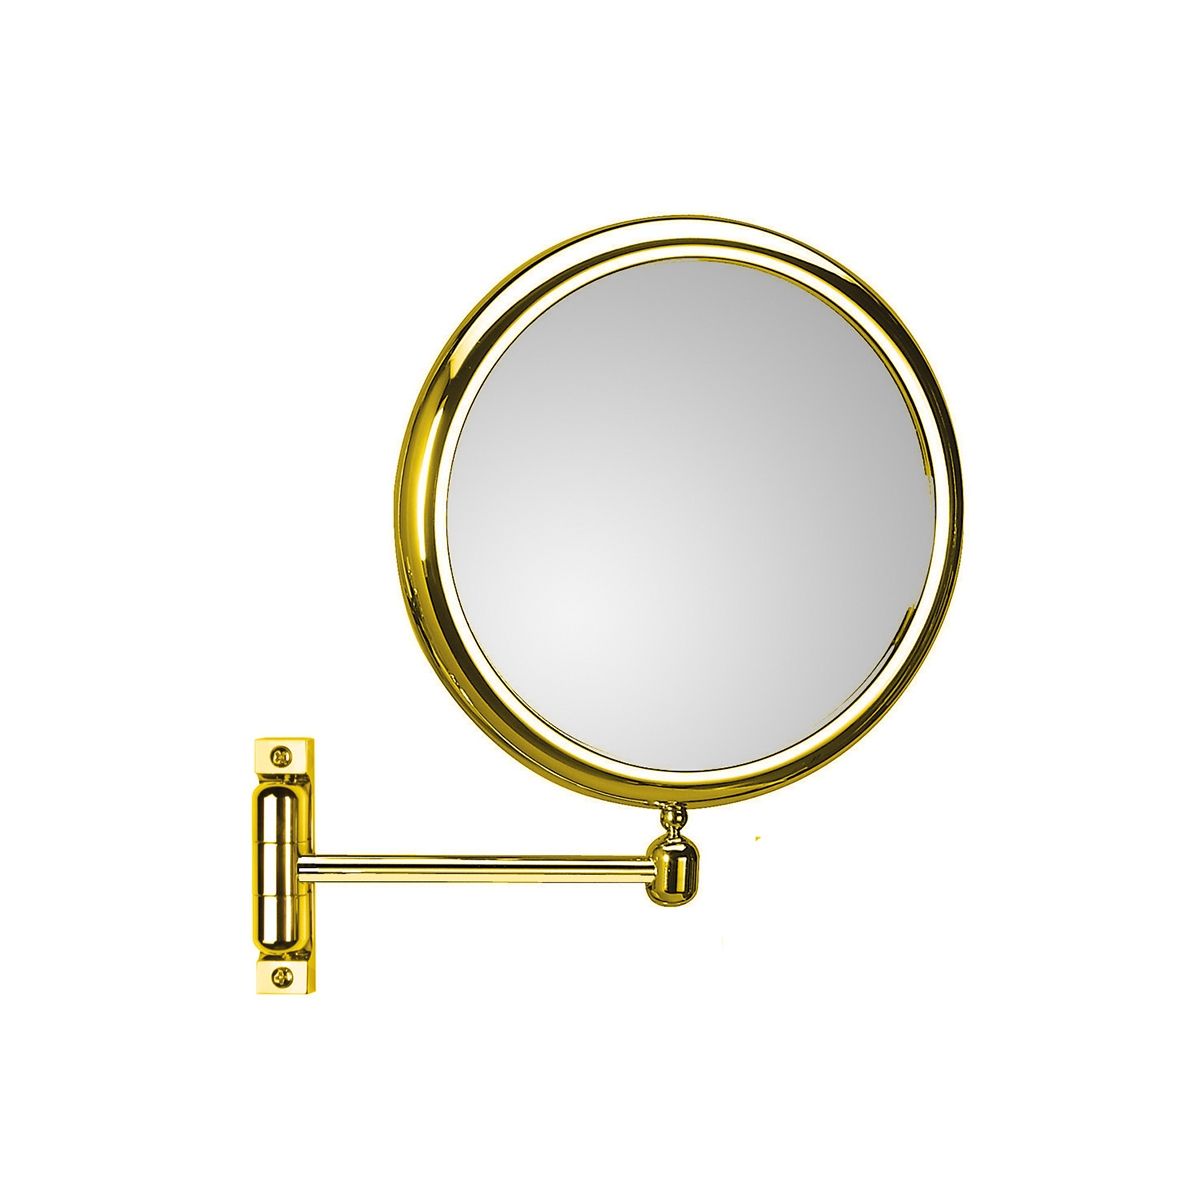 Lighted Magnifying Mirrors for Visibility